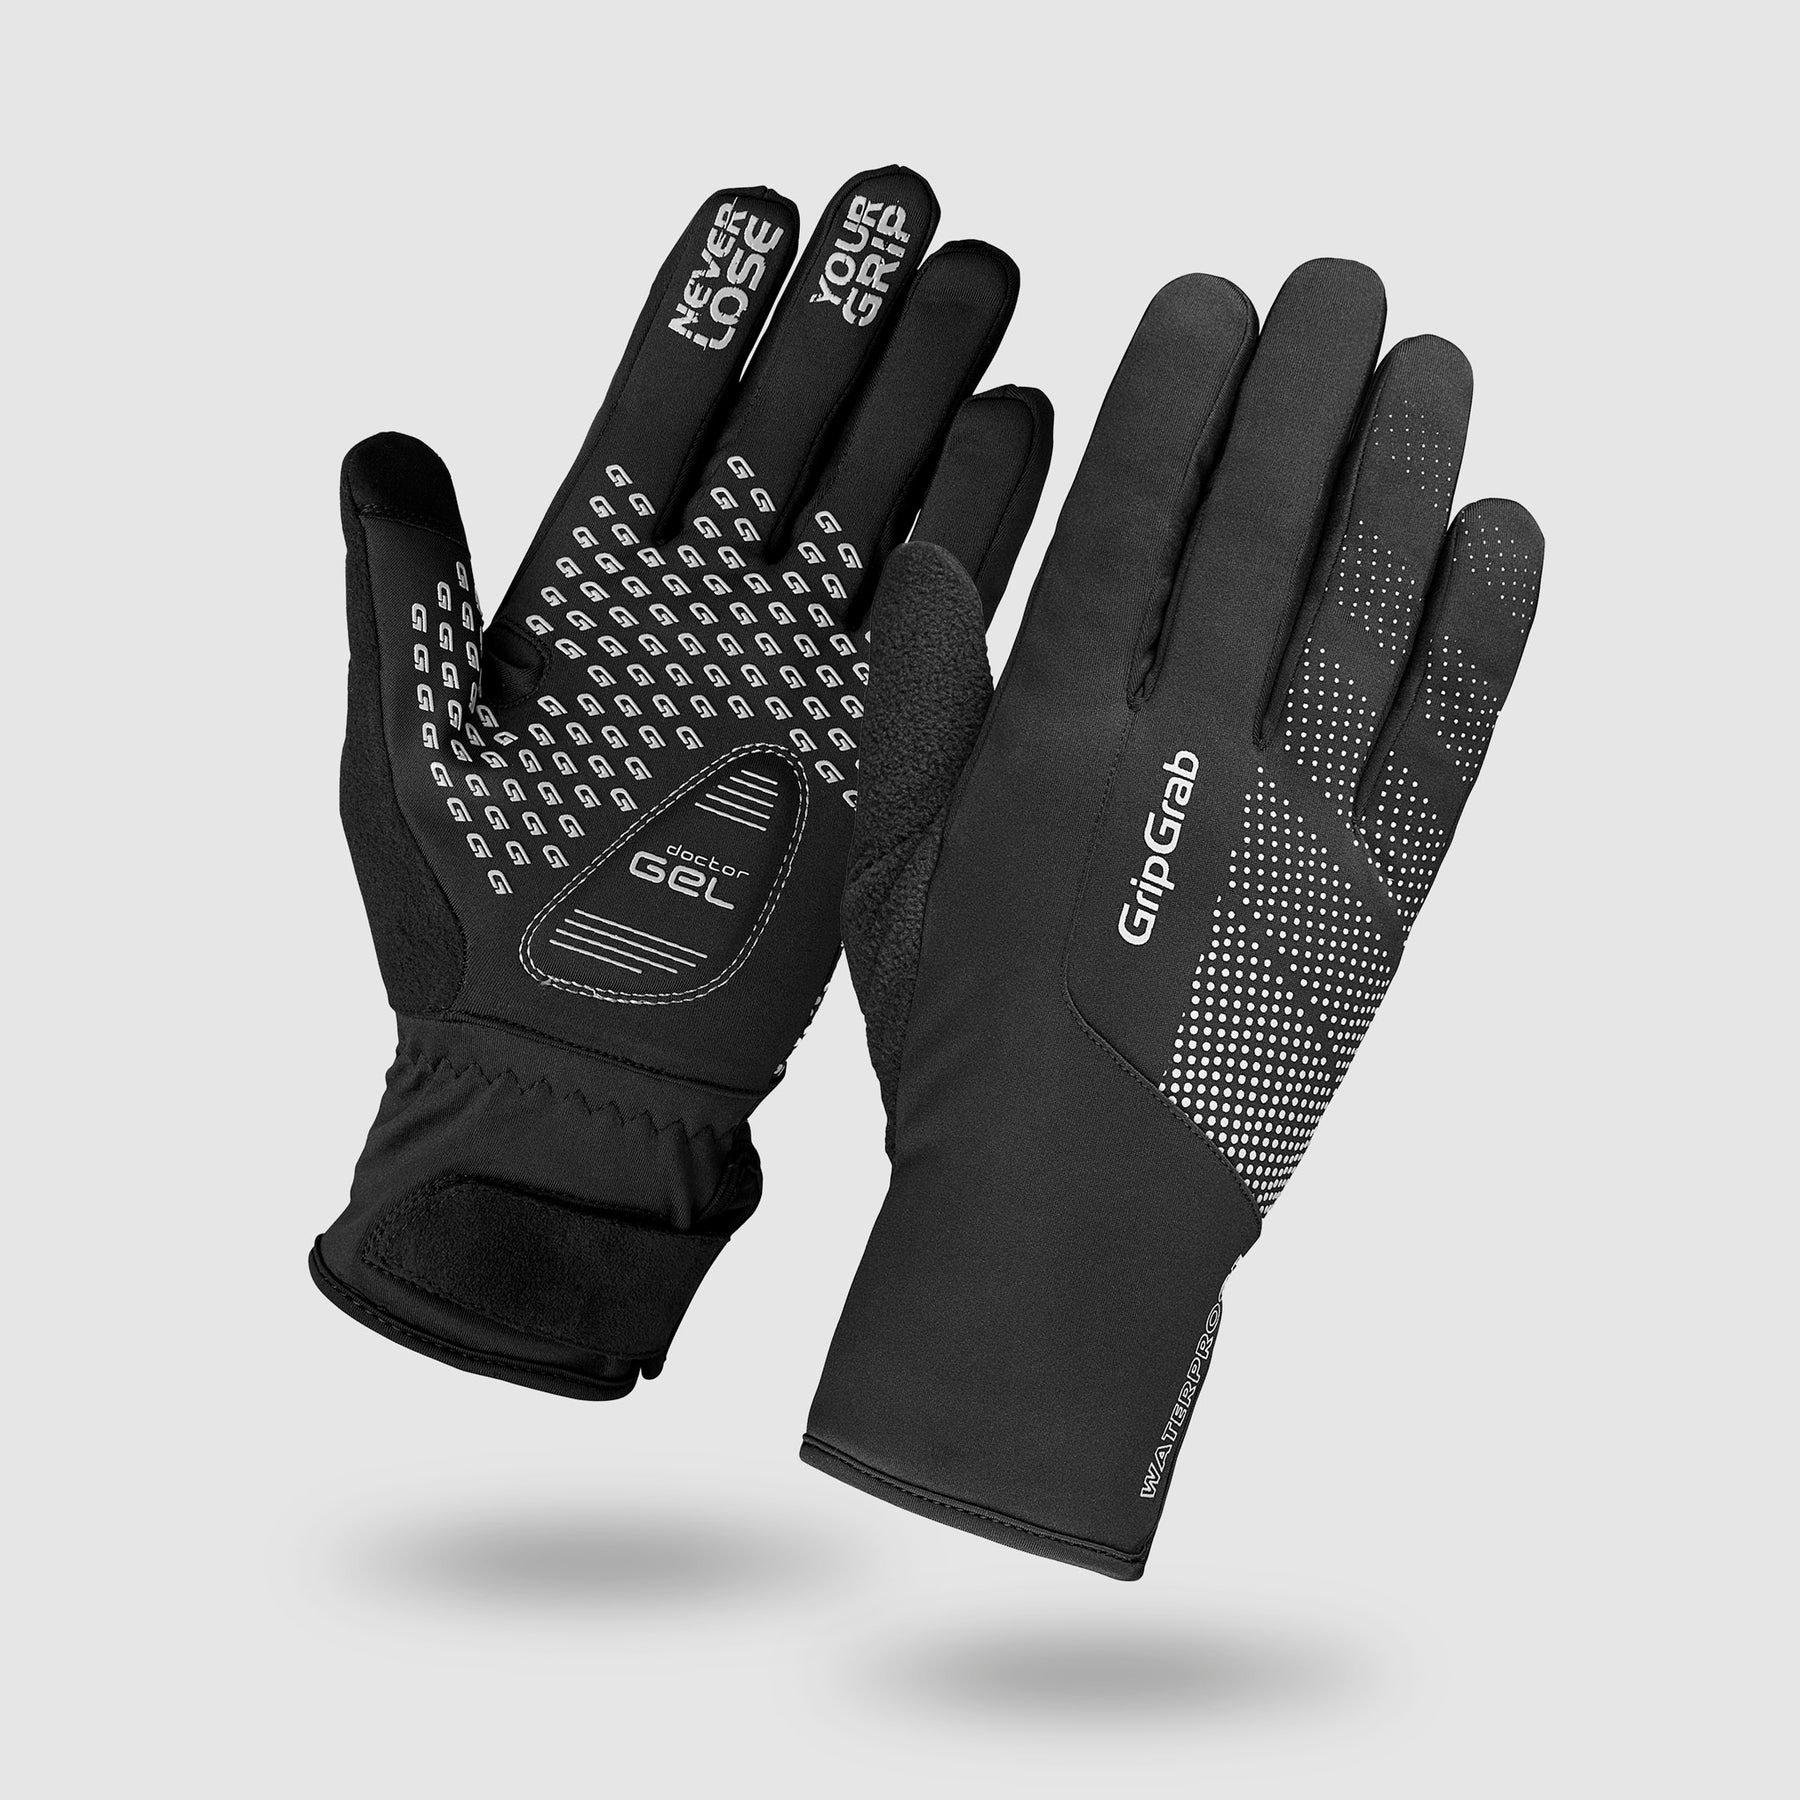 Waterproof Angling Glove Stab Proof, Stingproof, Non Slip, Easy To